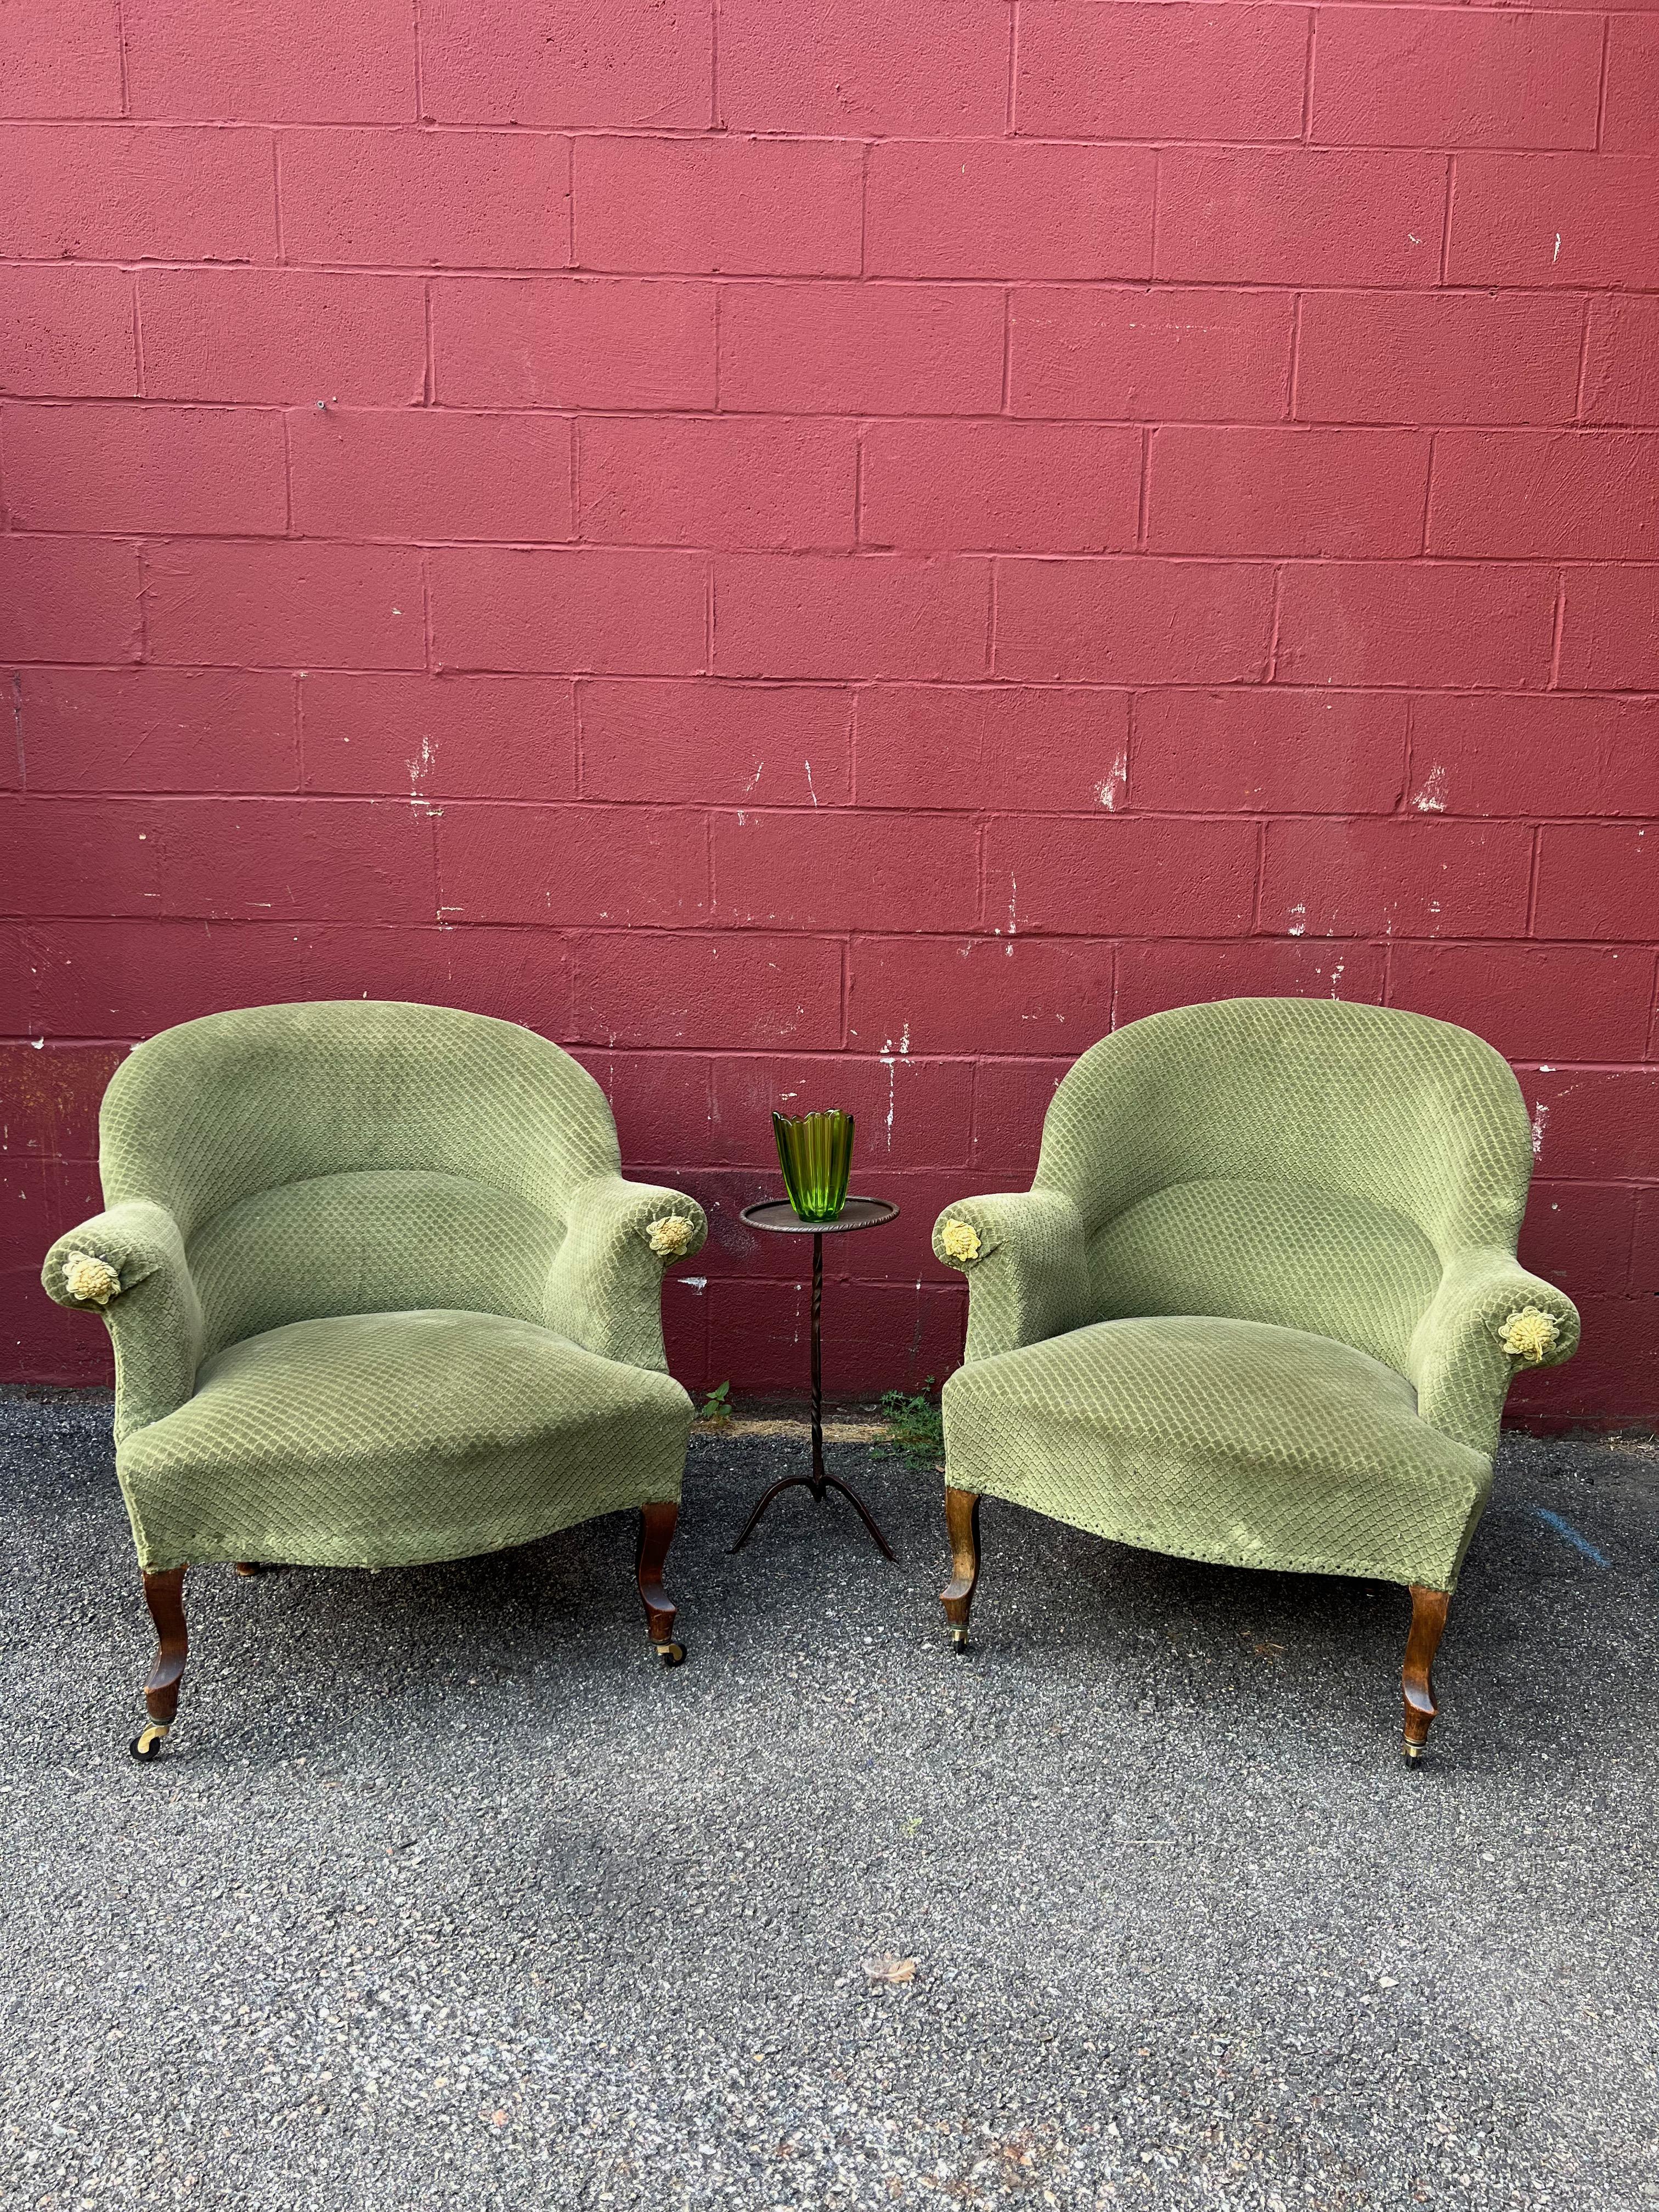 A classic pair of Napoleon III-style armchairs. Crafted in the late 19th century, these elegant chairs feature cabriole legs with added casters on the front legs to provide a beautiful pitch while making it easy to move the chairs around a room. The